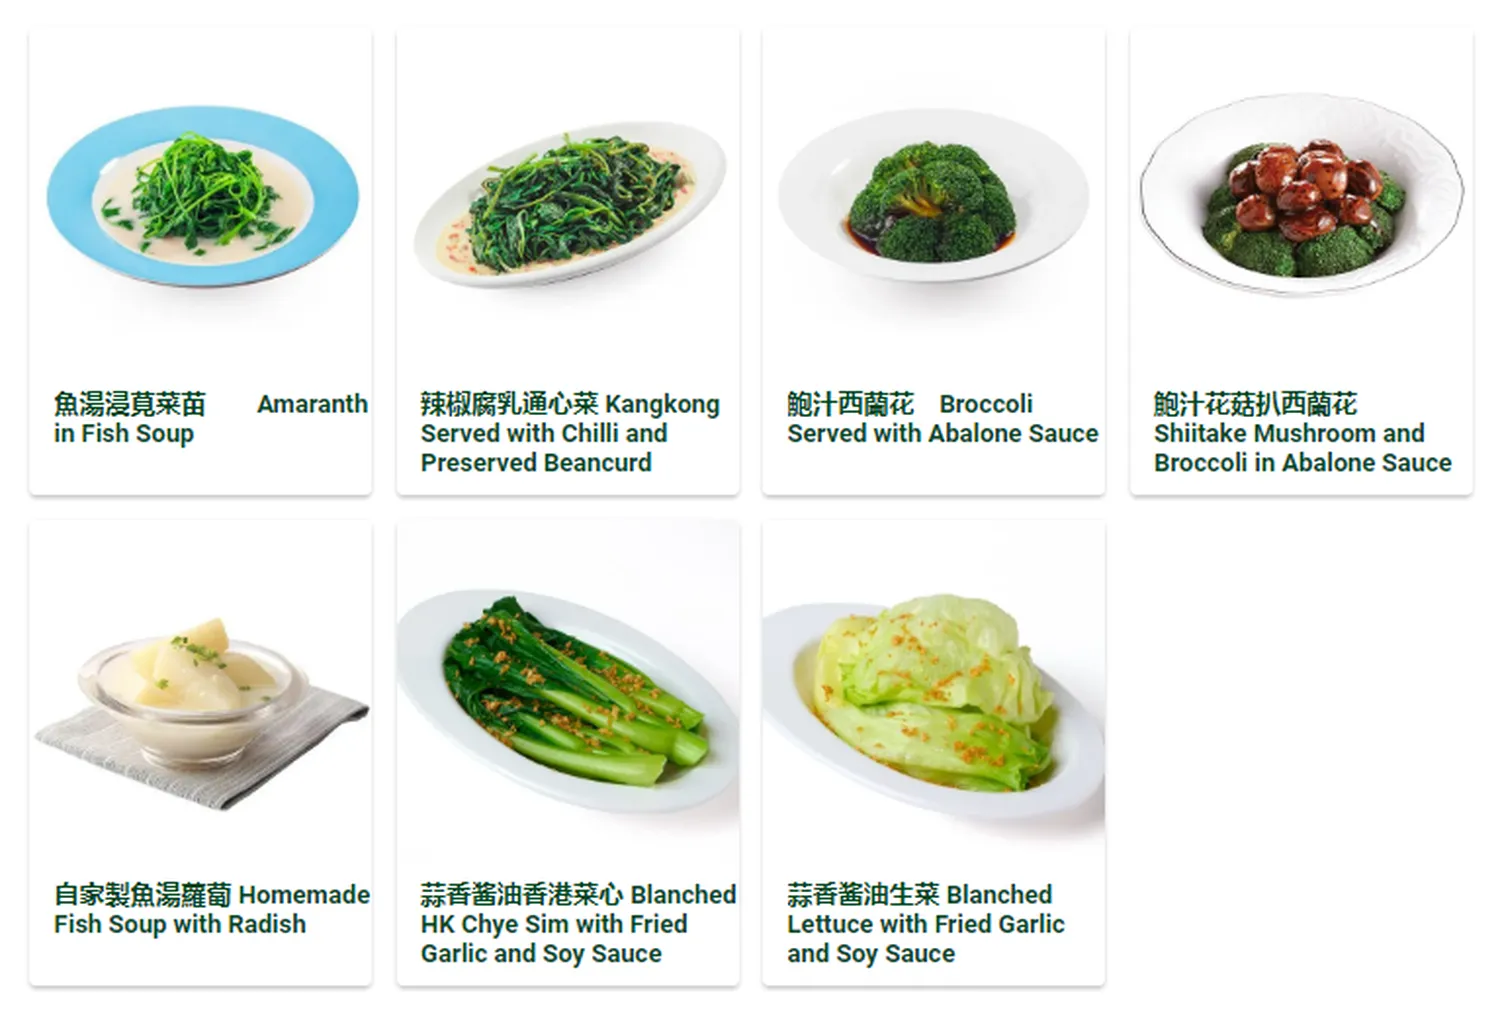 tsui wah menu singapore 蔬菜‧健營之選 Vegetables and Healthy Choices